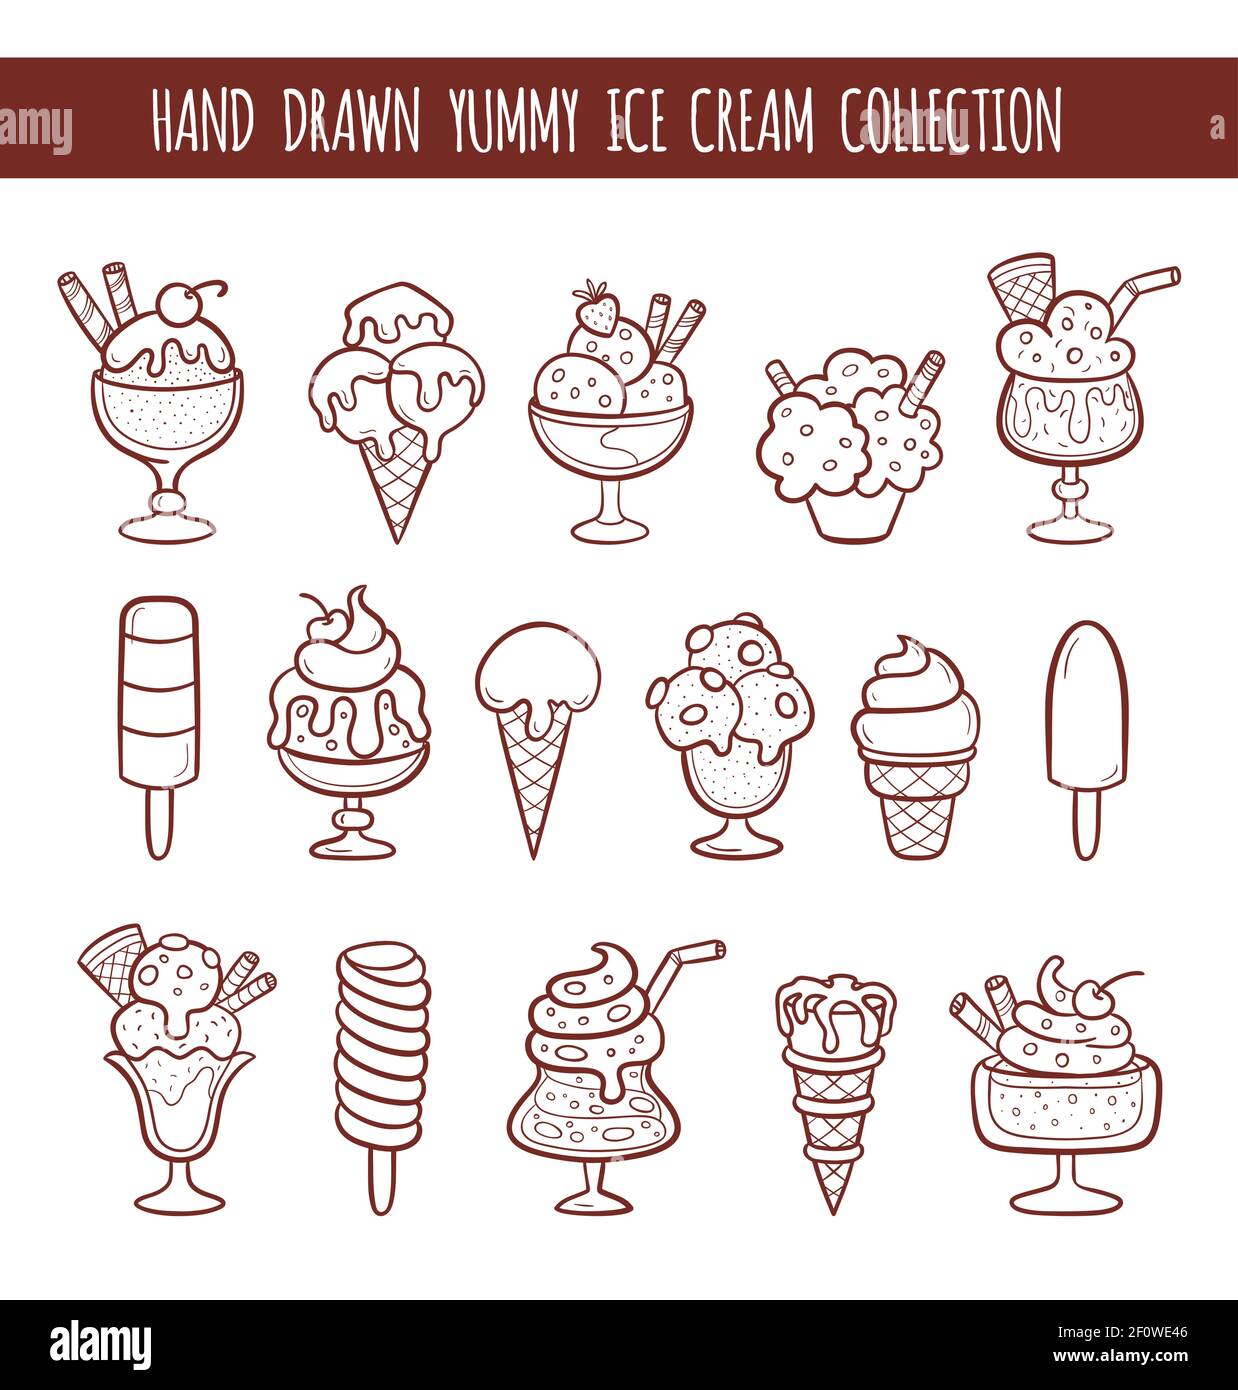 Set of 16 hand drawn vector ice cream illustrations isolated on white. Cones and ice creams made in doodle style. Stock Vector